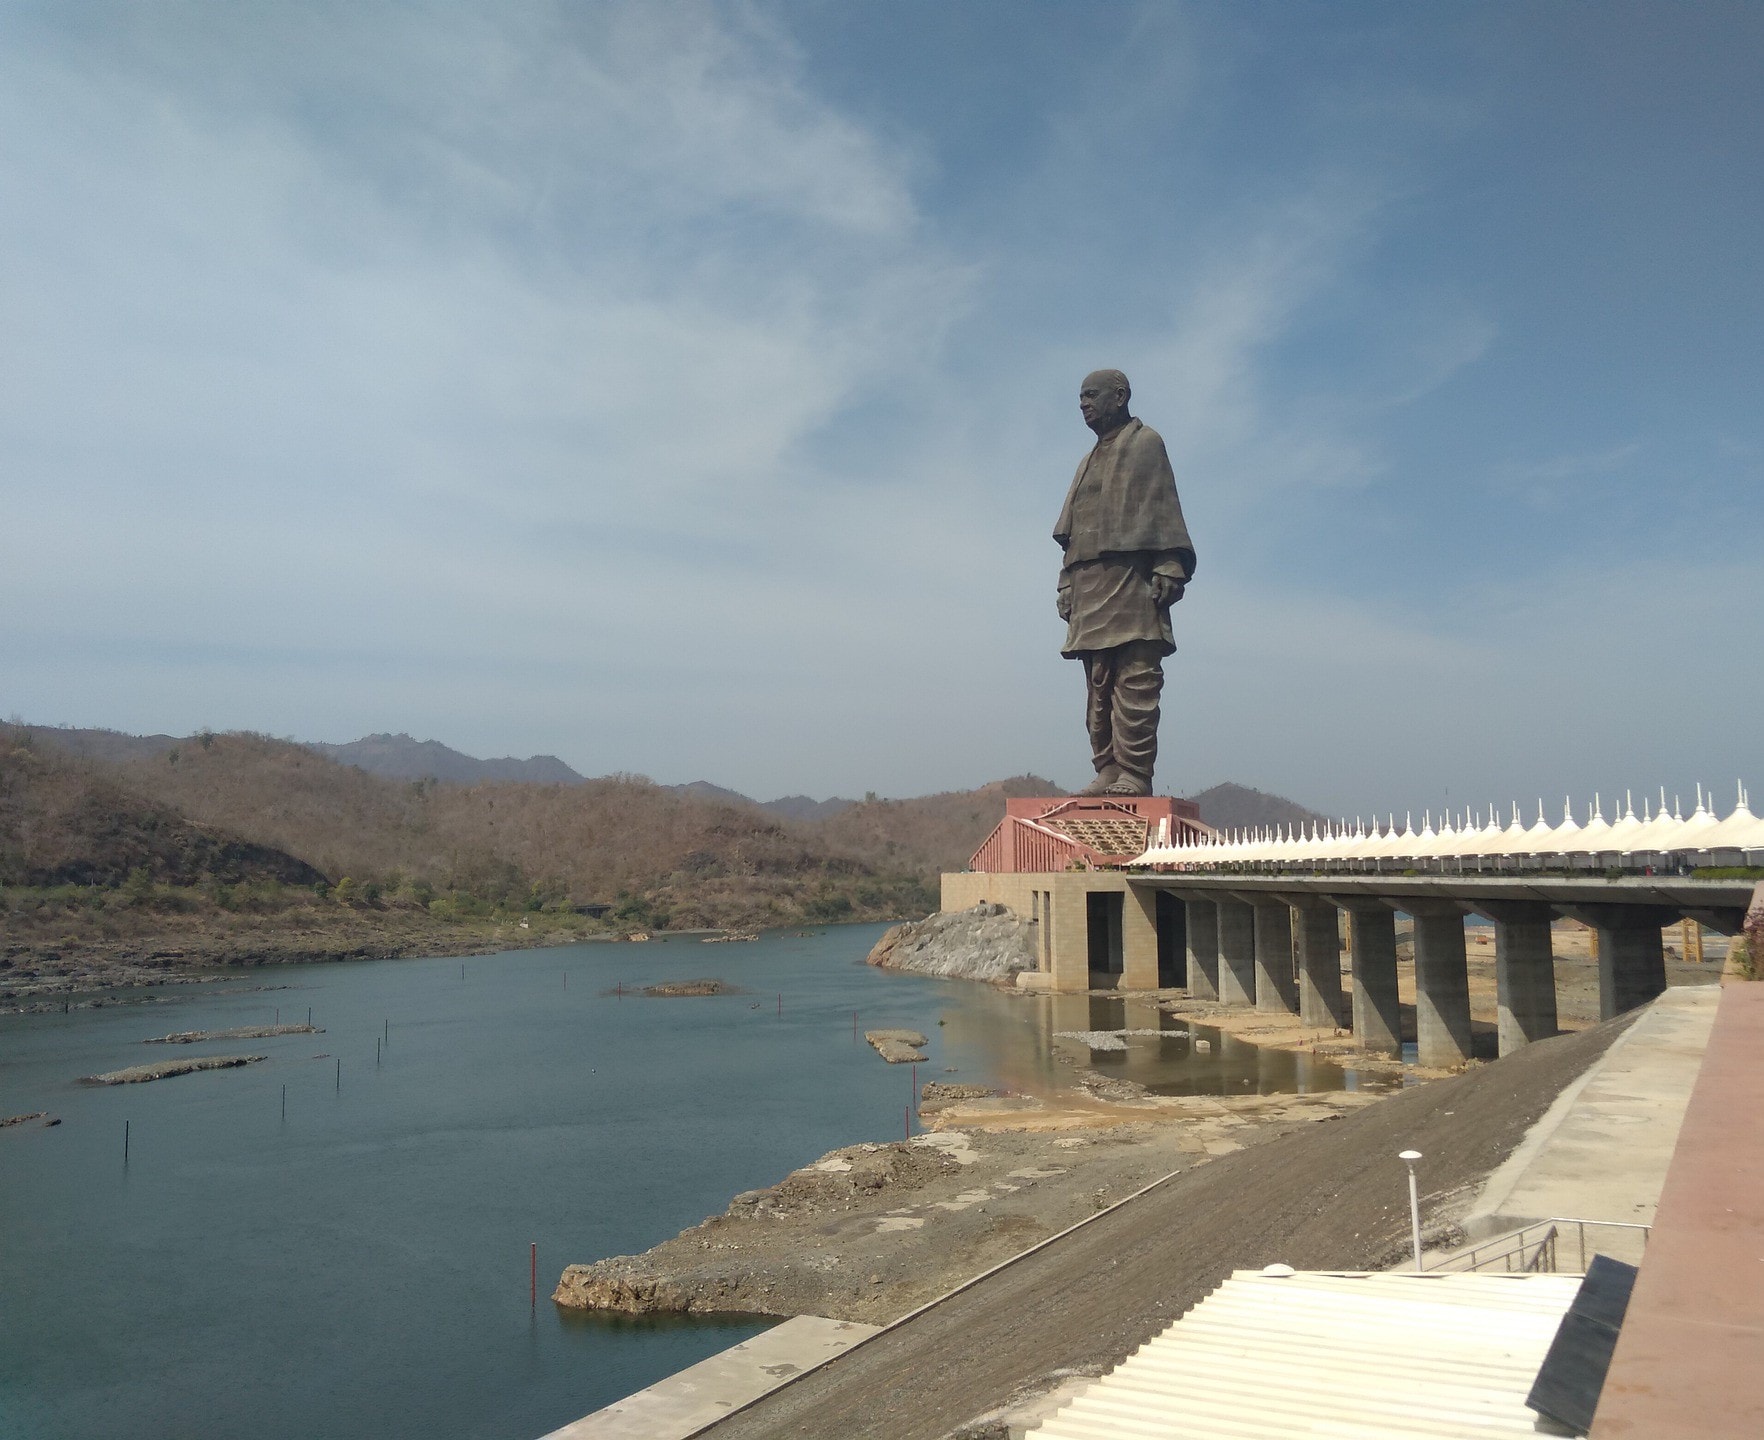 By the banks of which Indian river is the tallest statue in the world located?